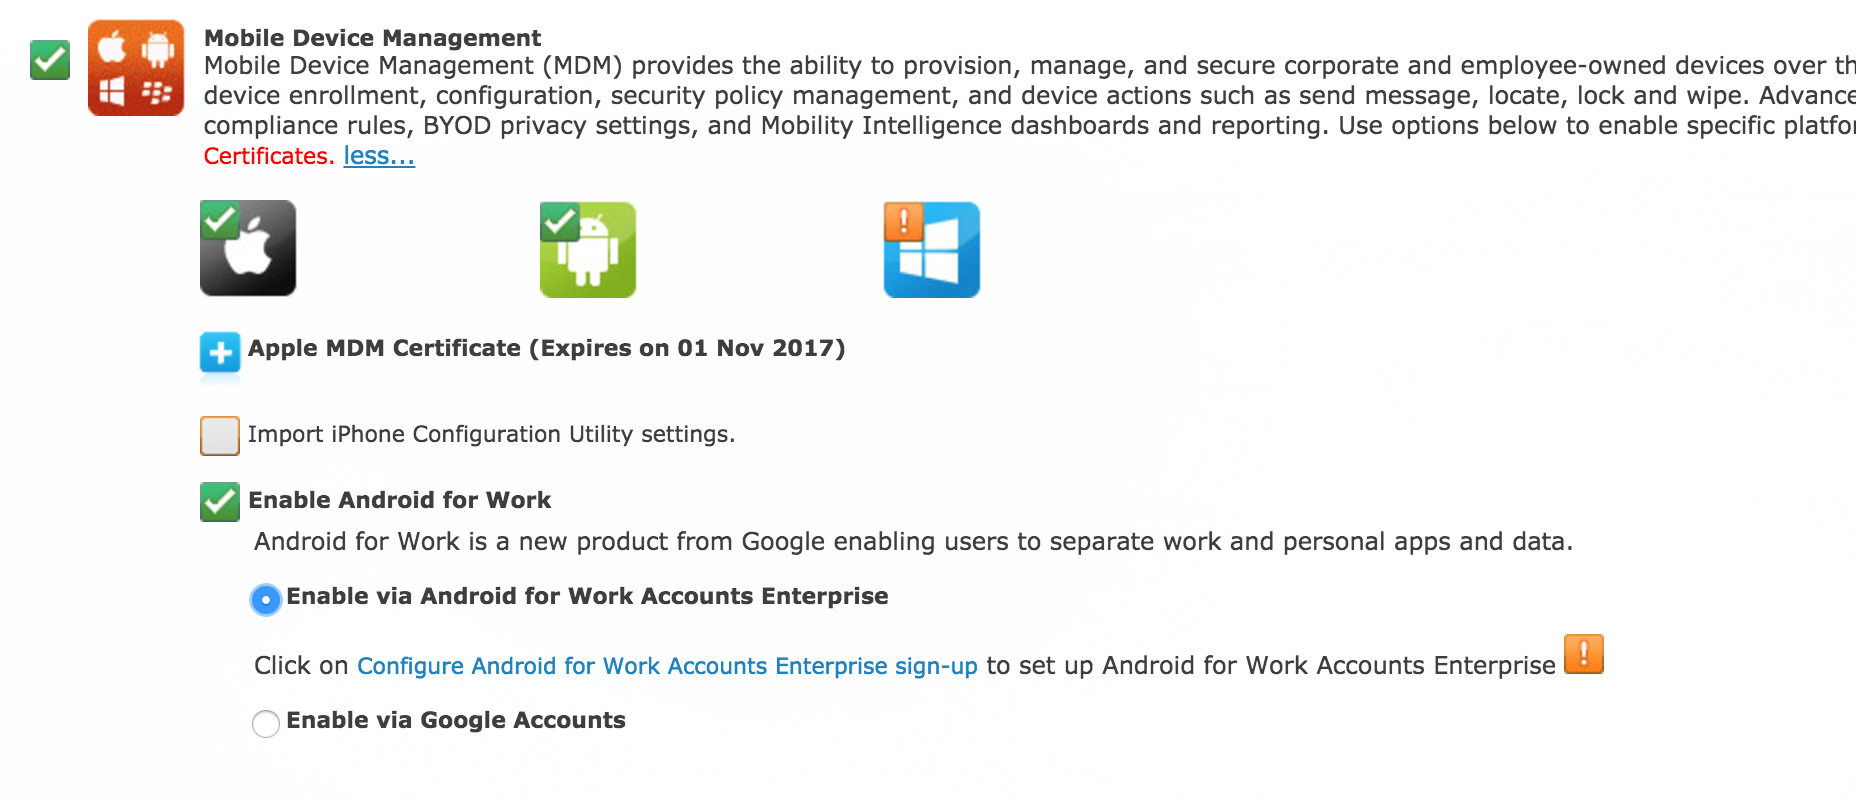 Enable via Android for Work Accounts Enterprise